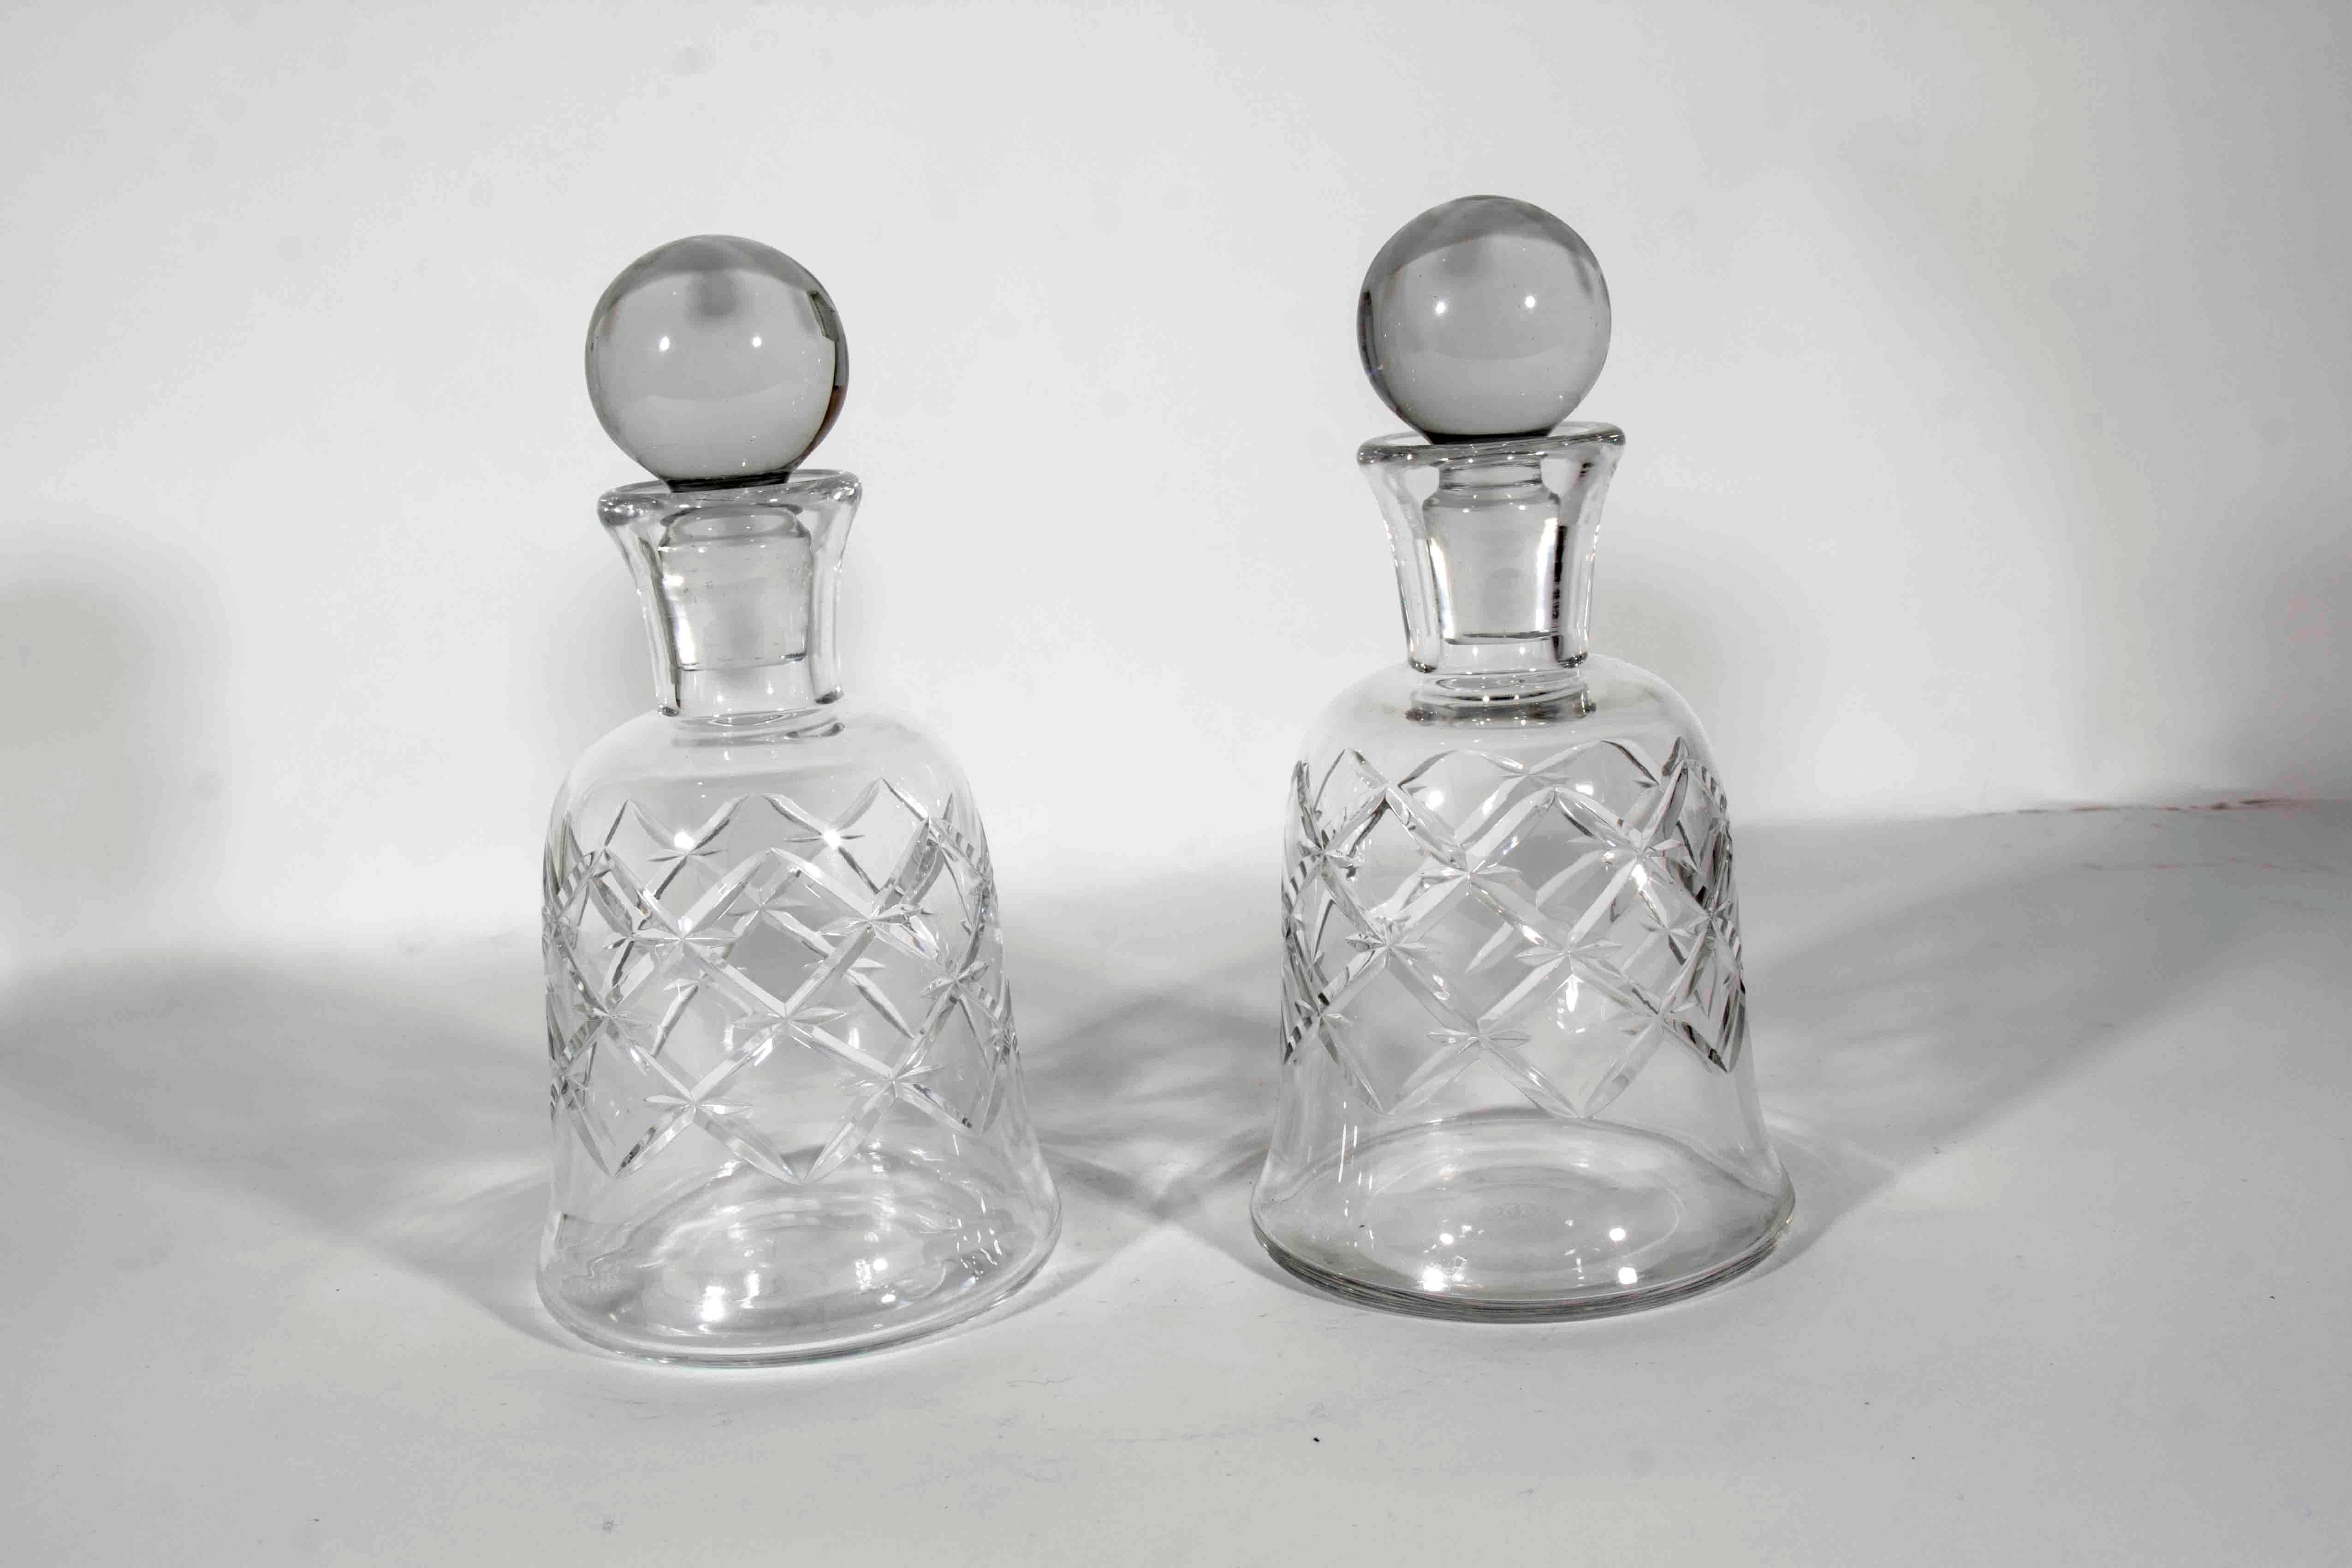  Antique Acid Etched Stamped Baccarat cut crystal decanter set. Excellent Antique condition these decanters would bring a great addition to any table or bar . The decanter measure 9.5 inches high x 5 inches width.